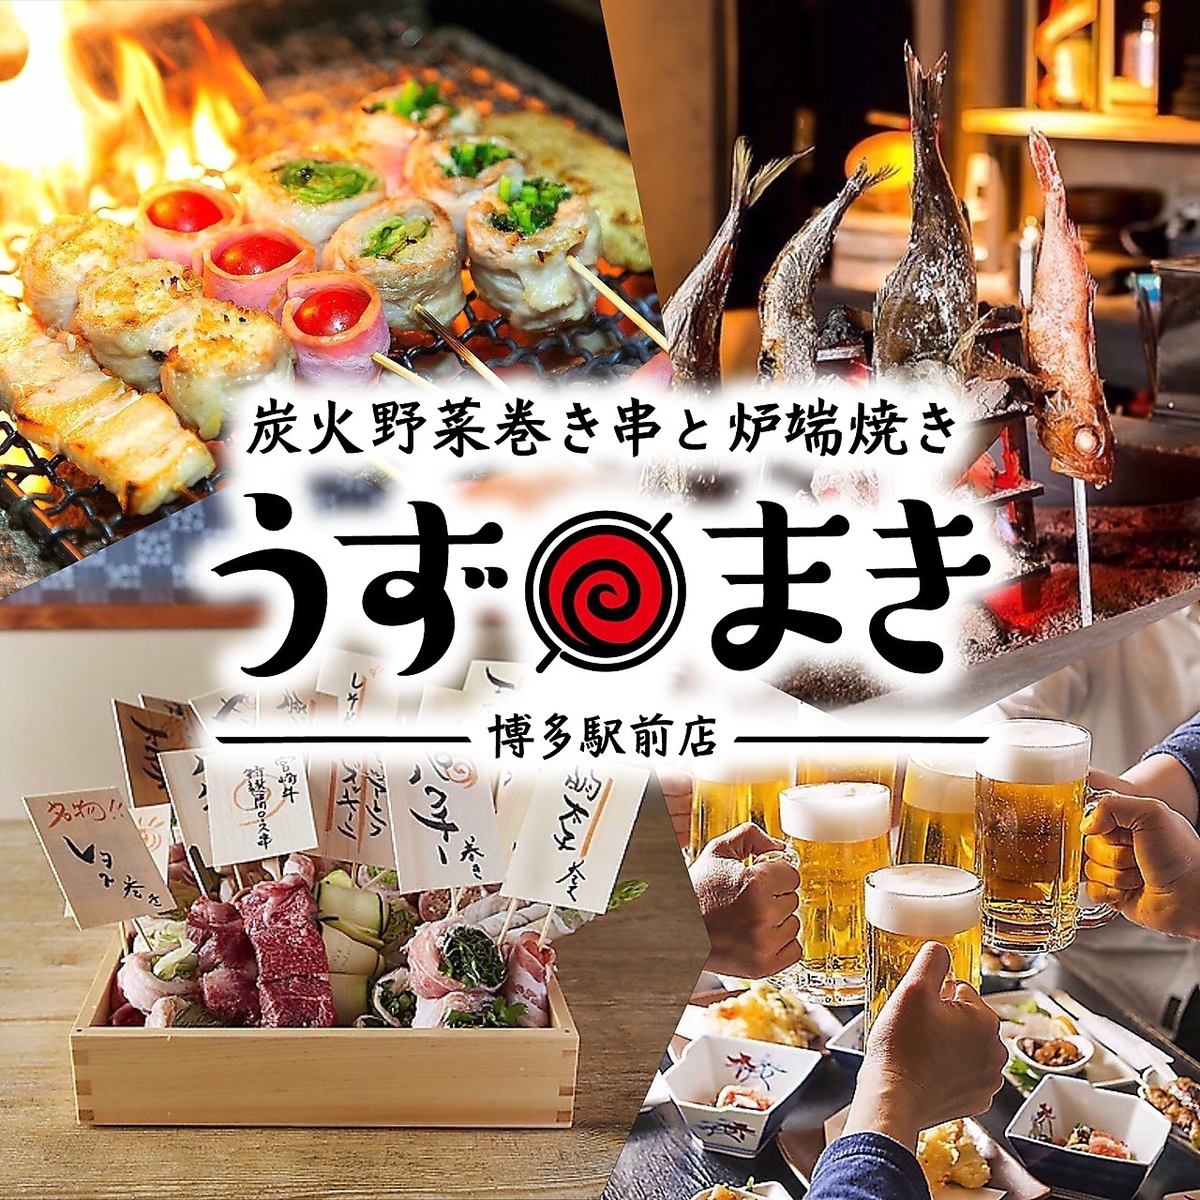 ◆Specialty: vegetable roll skewers ◆Cheers to beer with yakitori in one hand tonight!